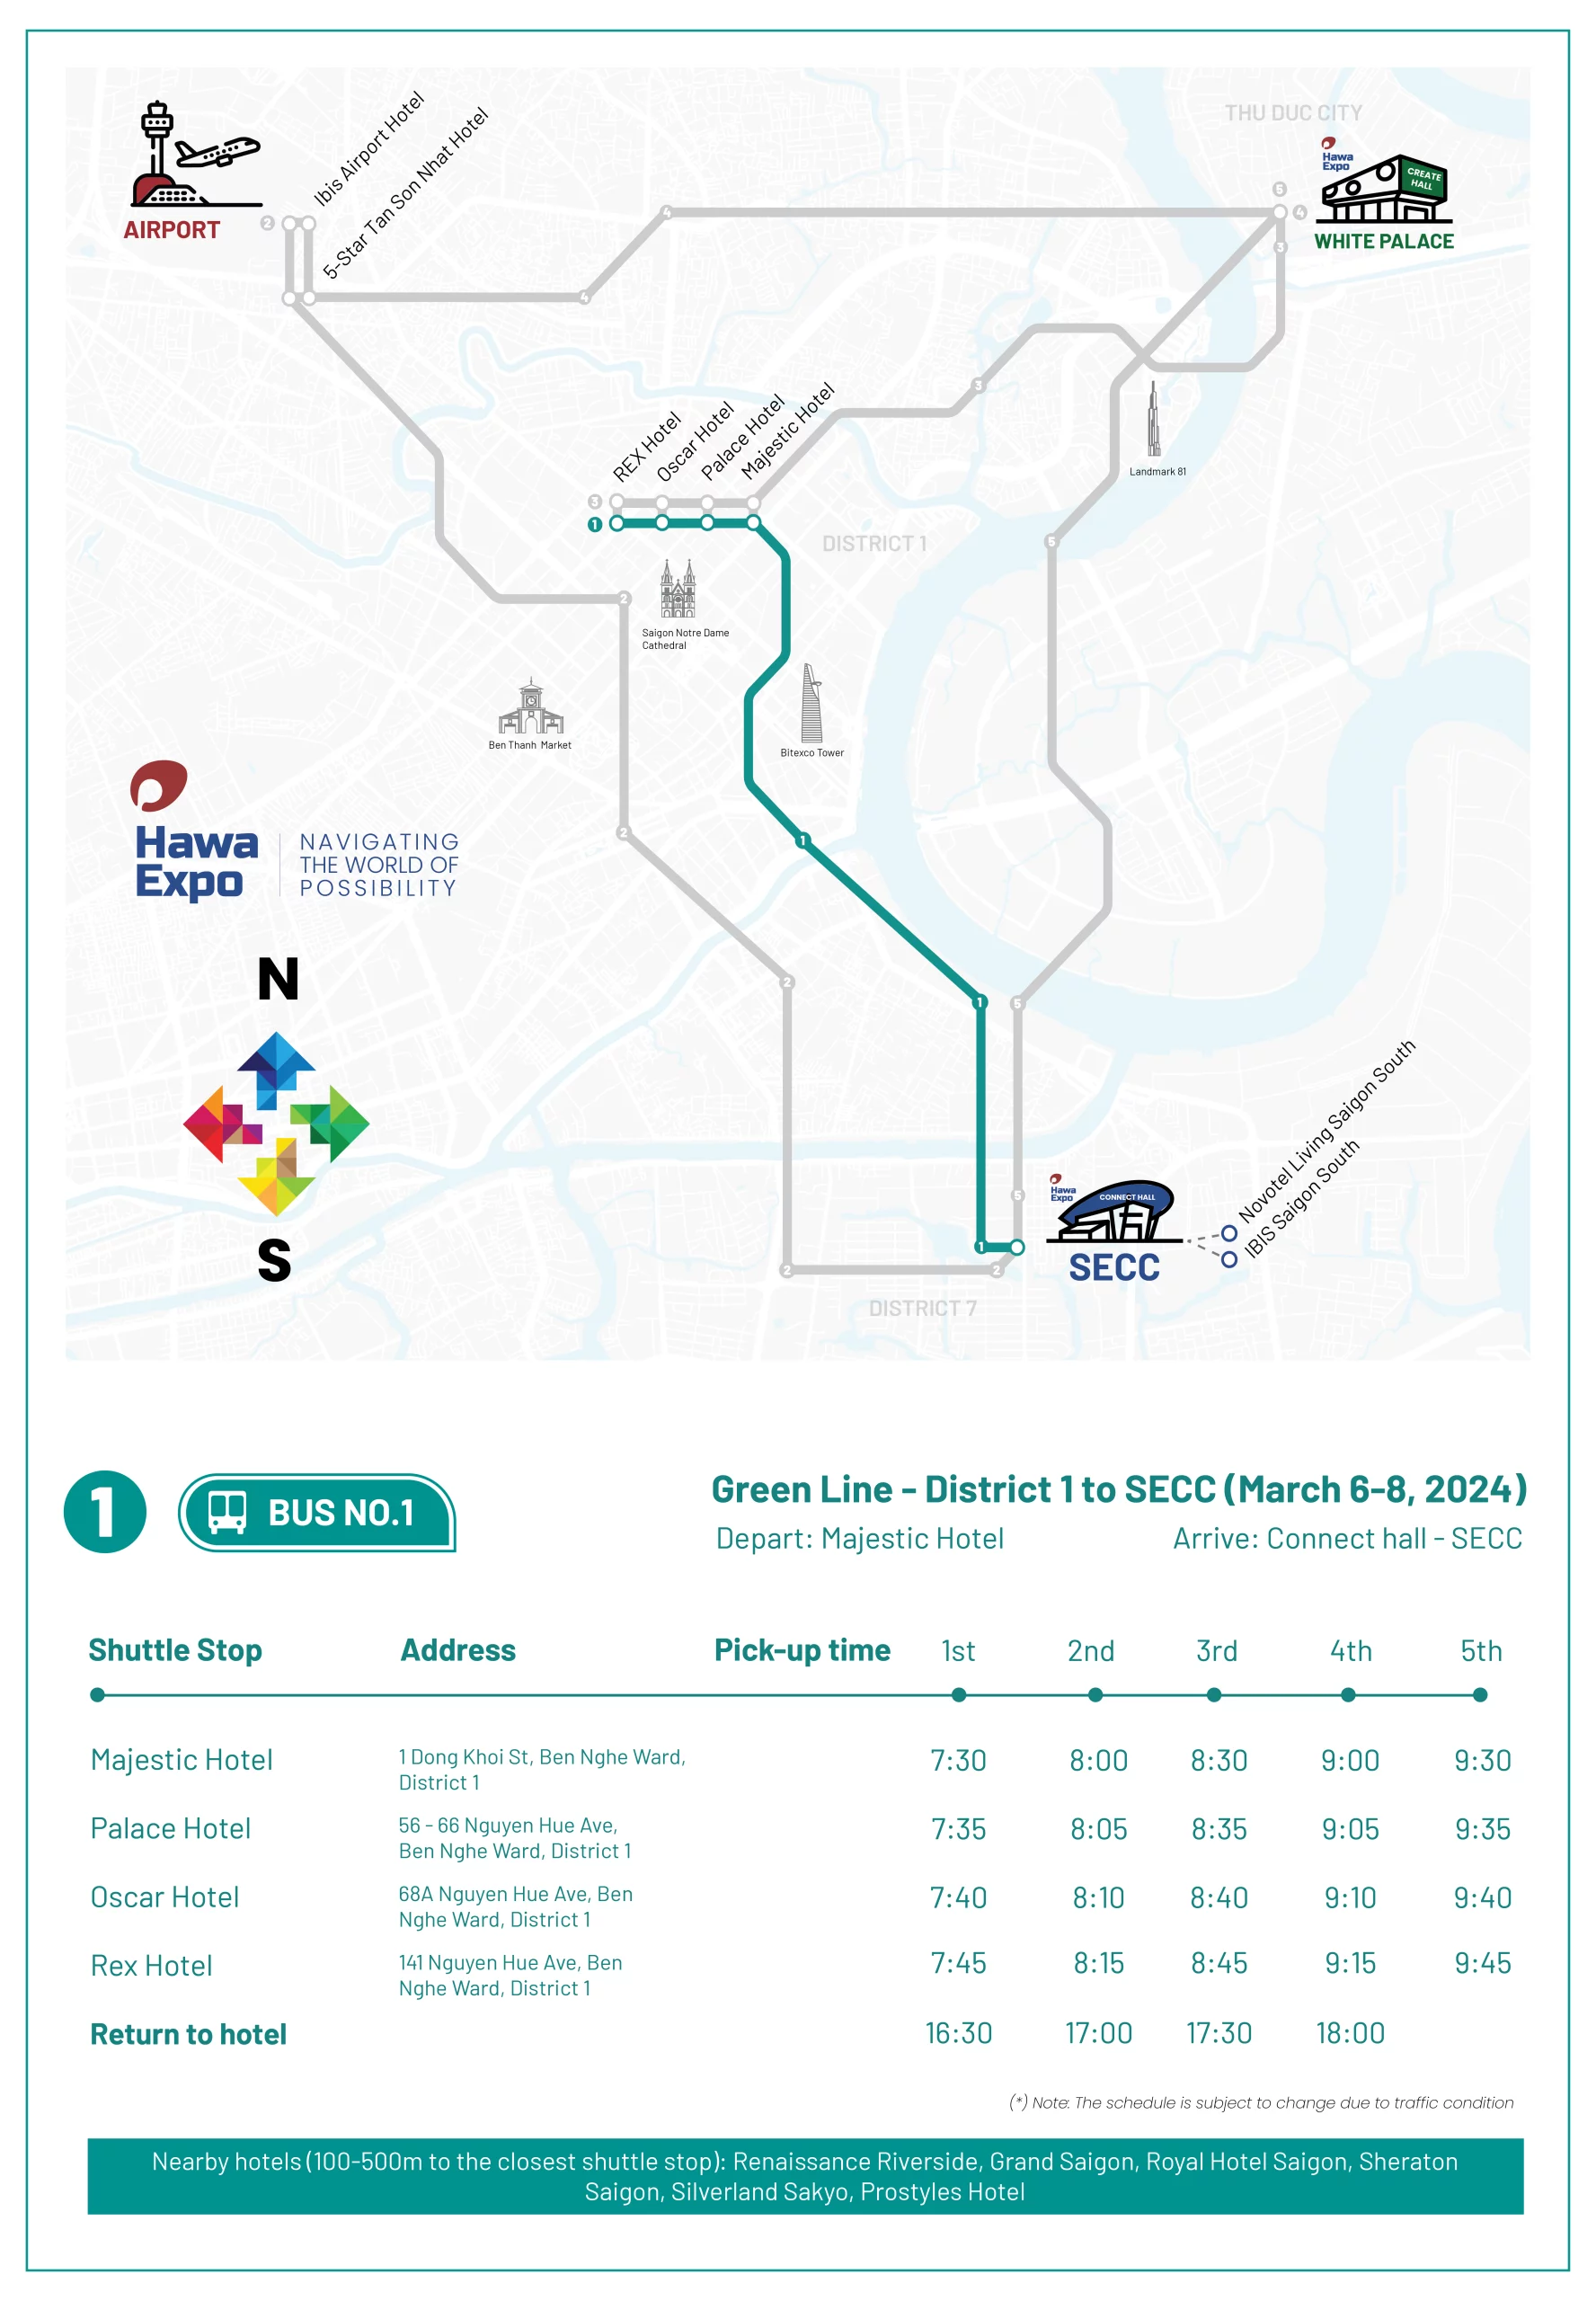 HAWAEXPO SHUTTLE BUS: From Hotels in District 1 to SECC